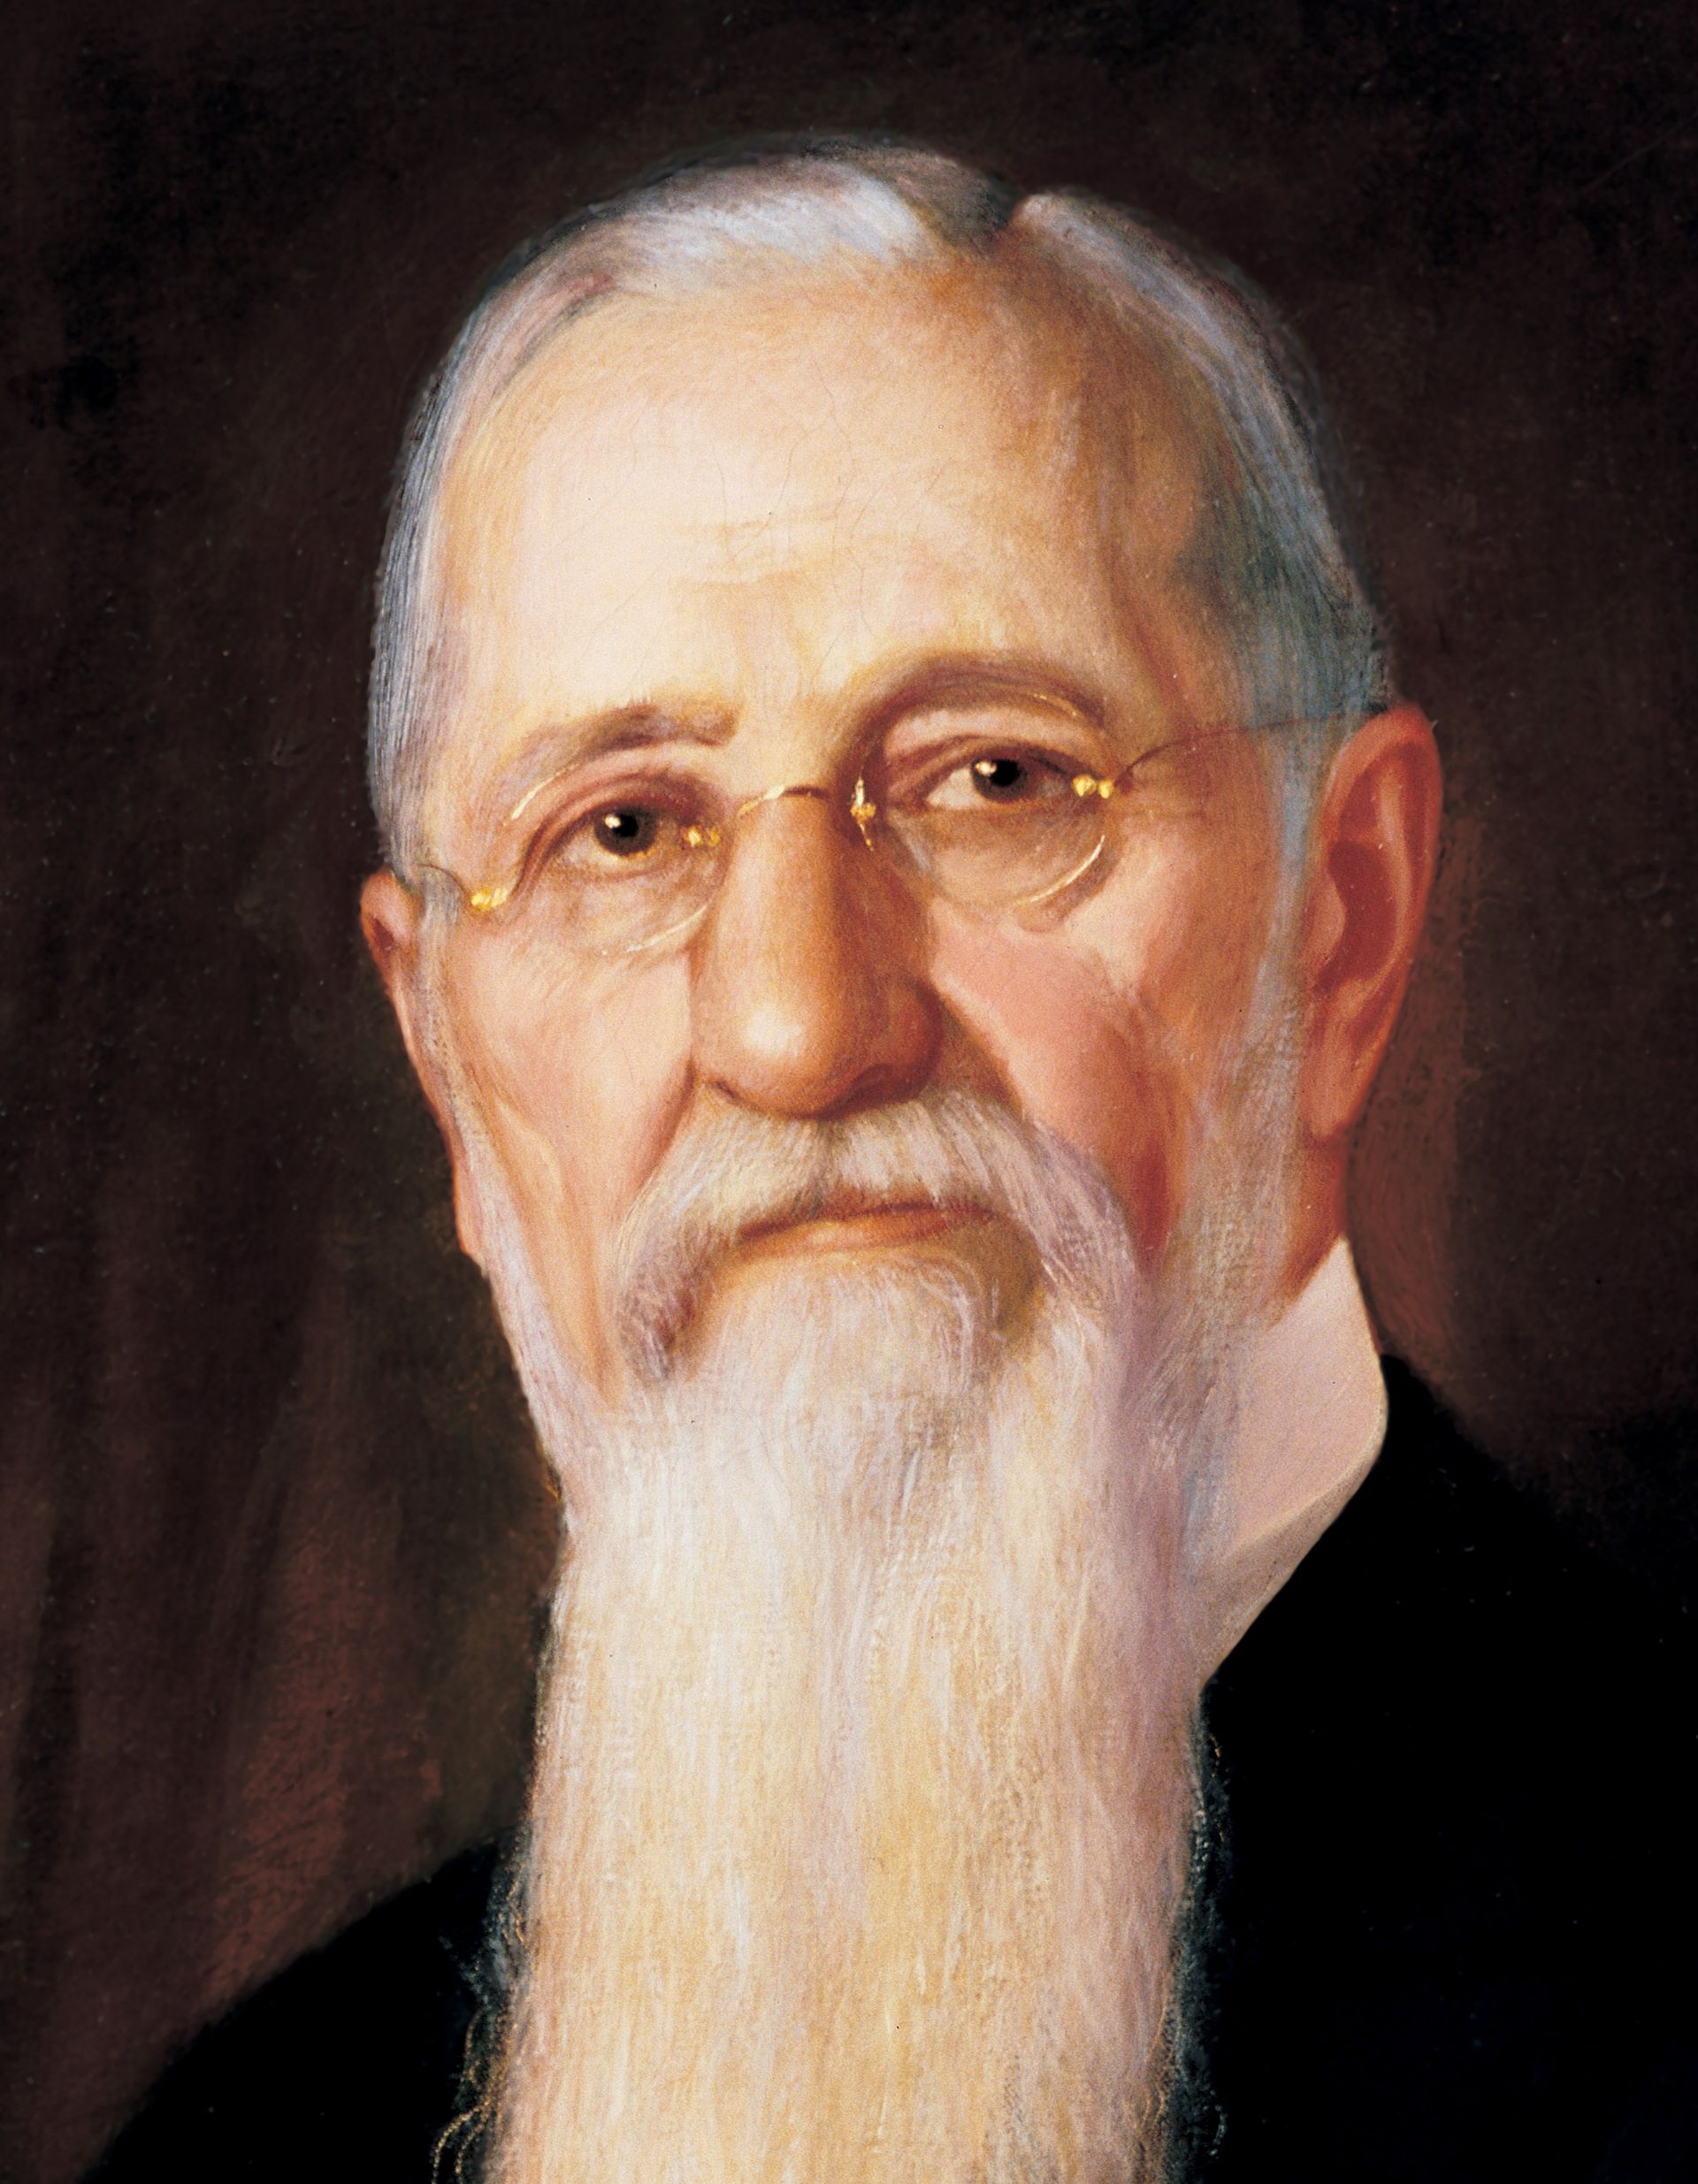 Joseph F. Smith, by A. Salzbrenner; GAK 511; GAB 127; Our Heritage, 105–7. President Joseph F. Smith served as the sixth President of the Church from 1901 to 1918.